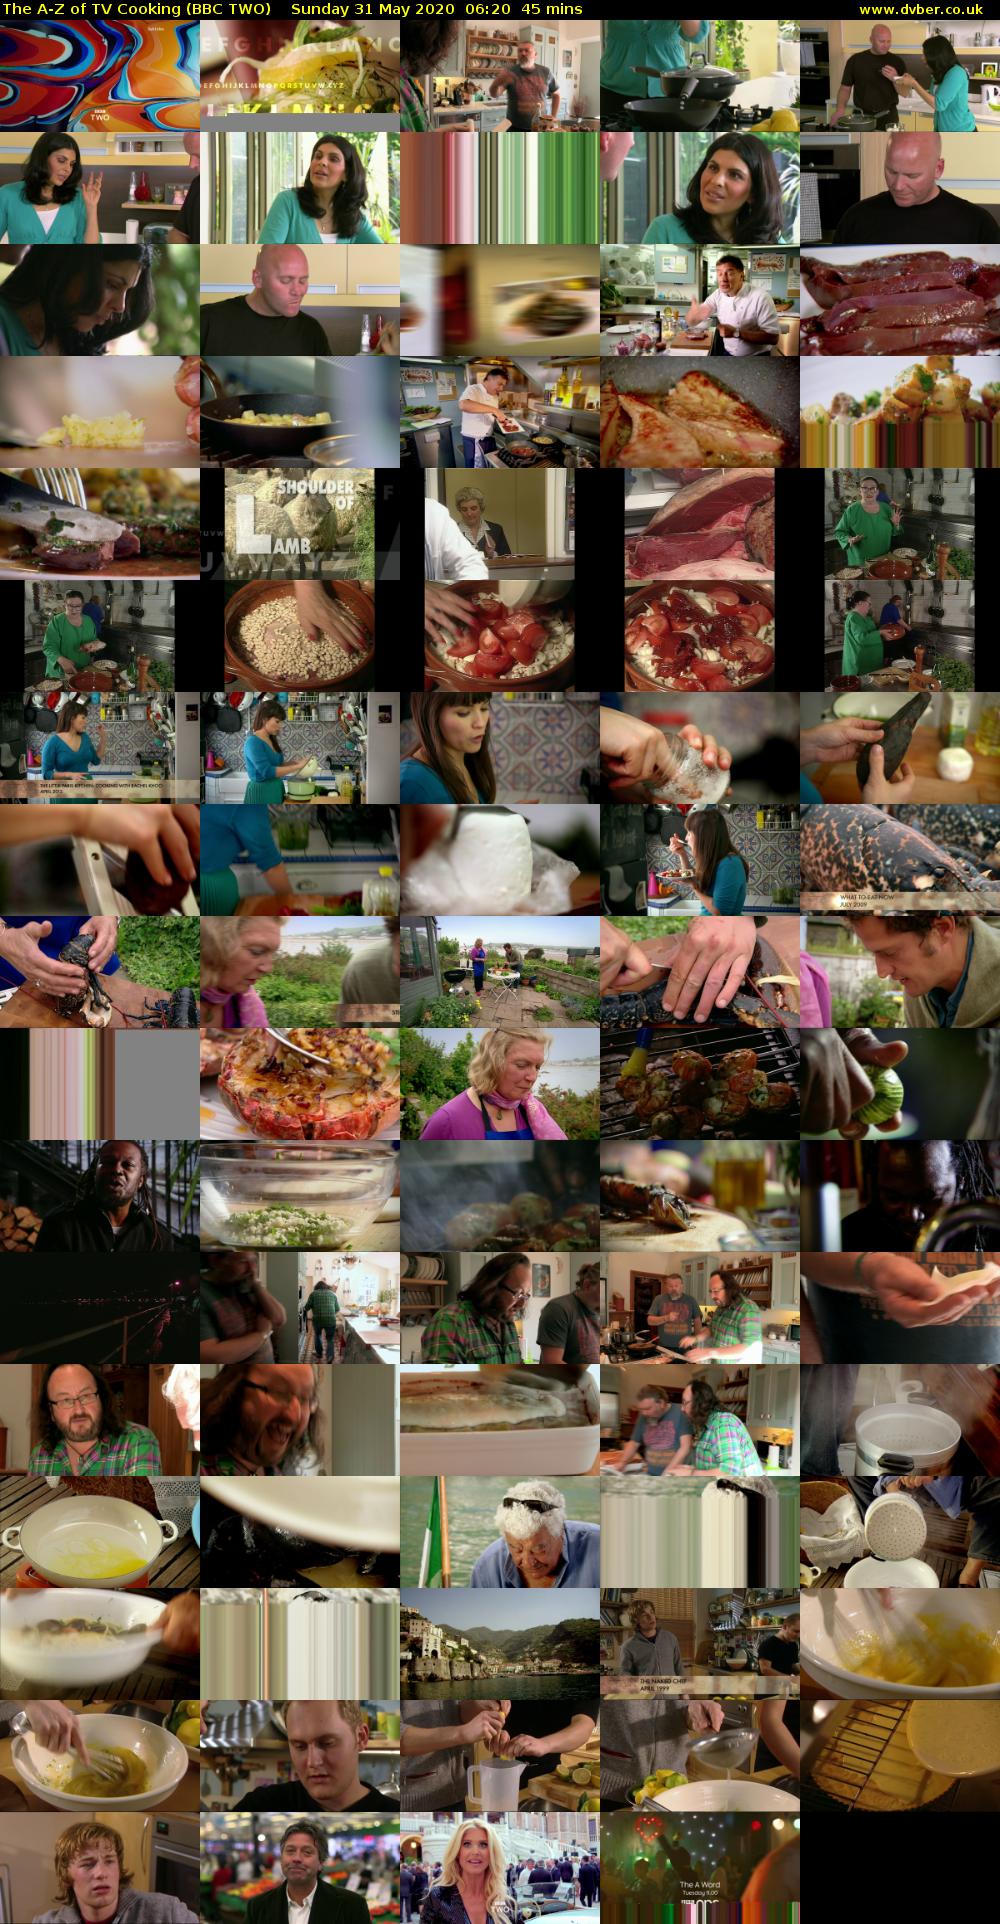 The A-Z of TV Cooking (BBC TWO) Sunday 31 May 2020 06:20 - 07:05